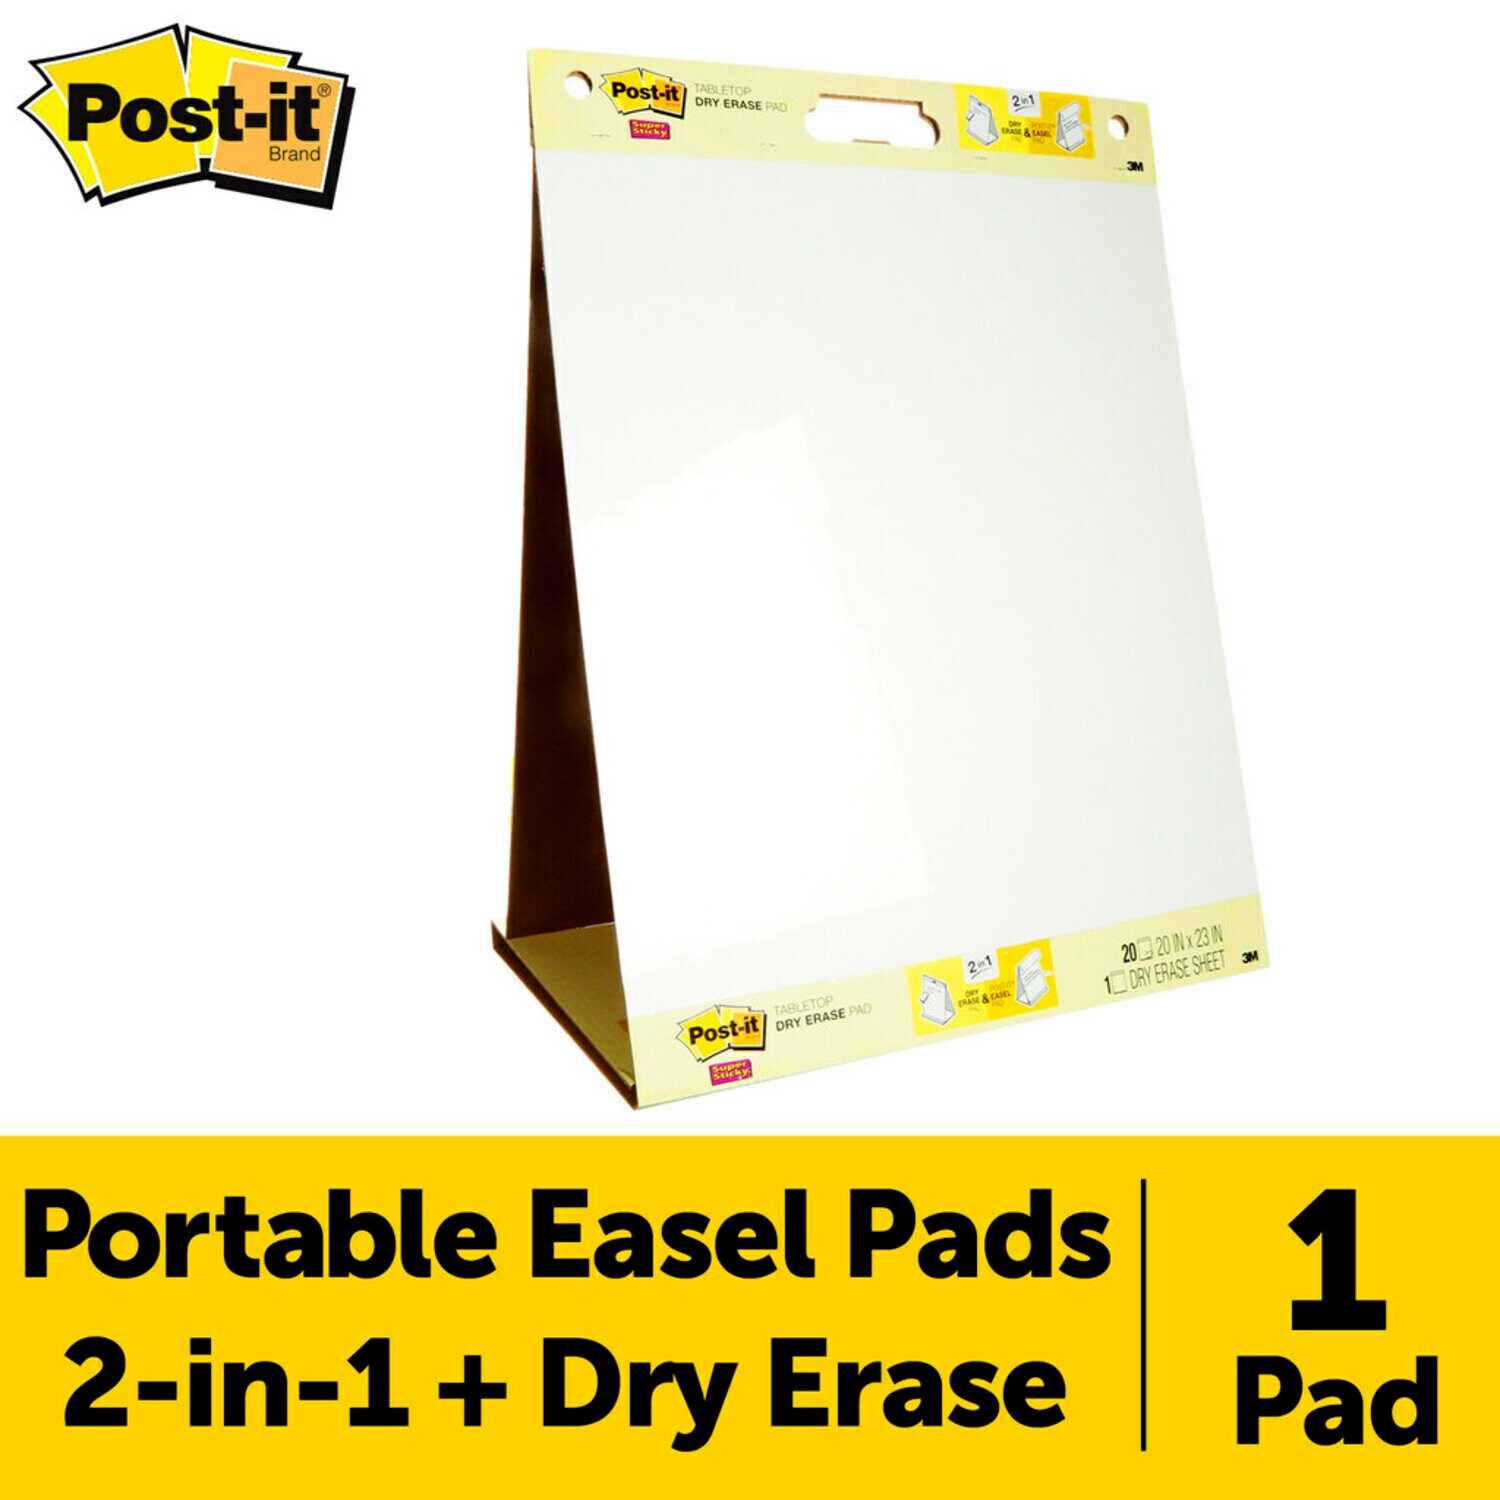 7100171595 - Post-it Super Sticky Tabletop Easel Pad with Dry Erase 563 DE, 20 in. x
23 in.